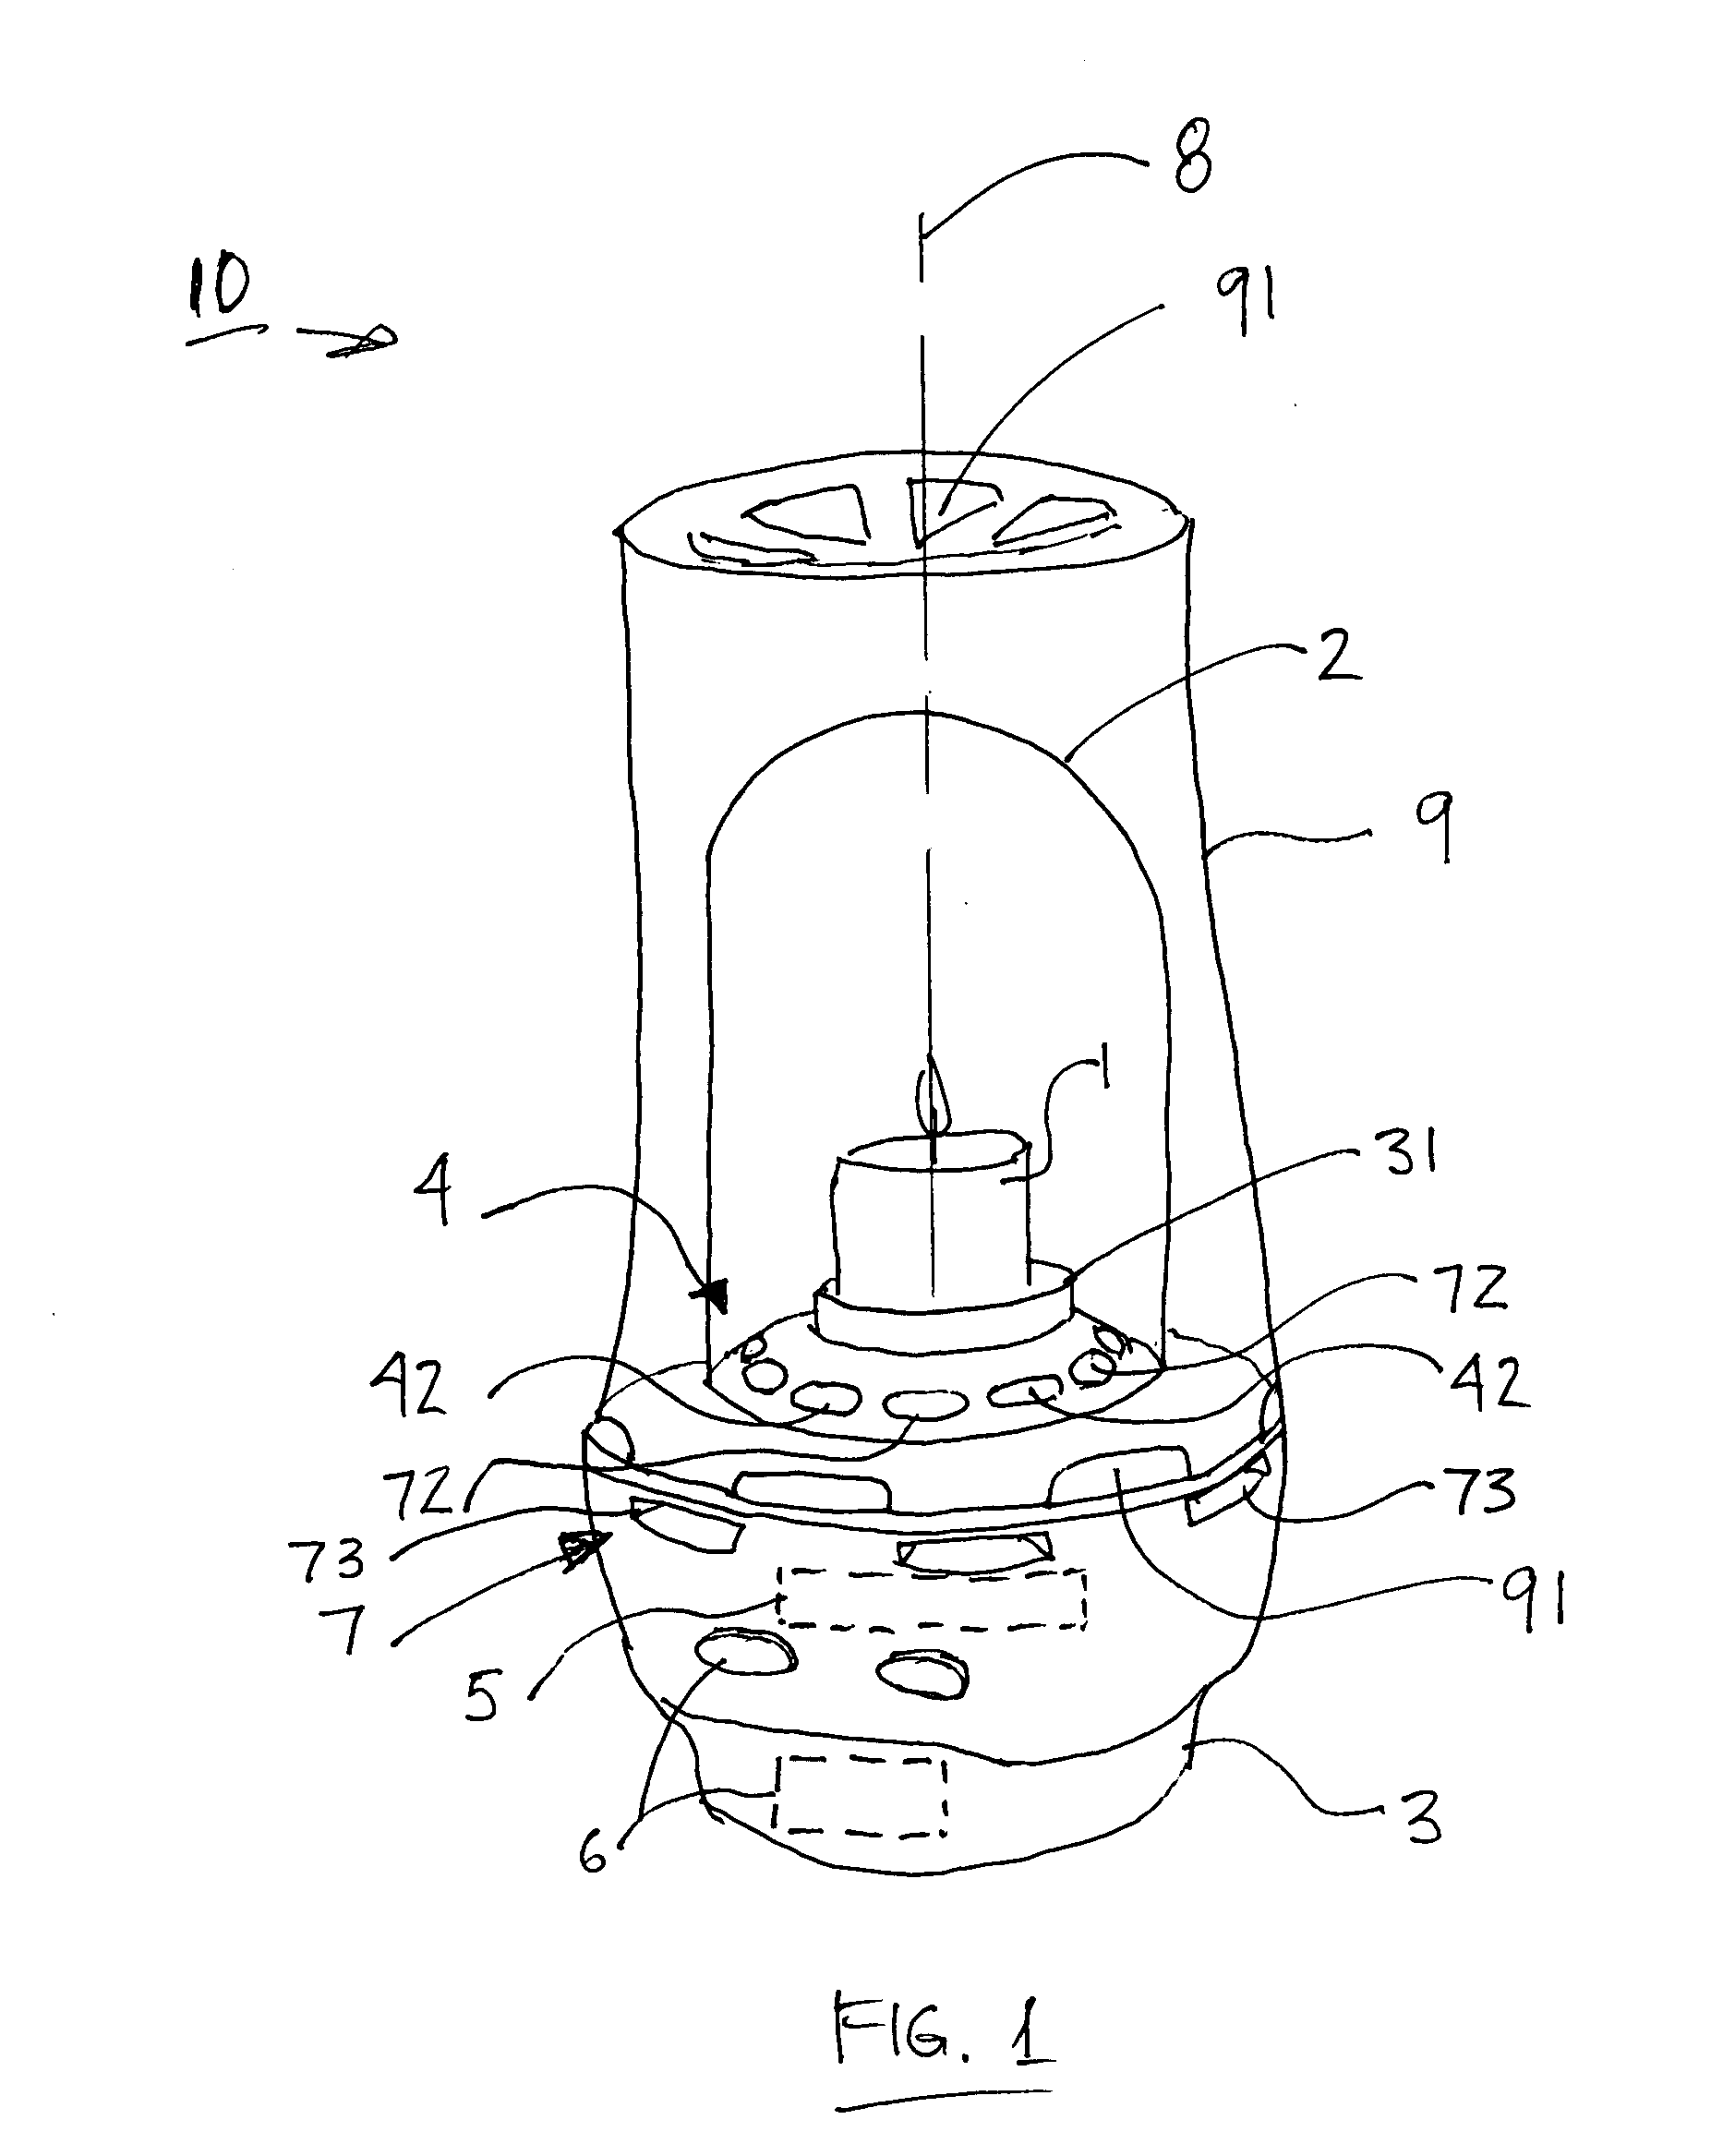 Method and apparatus for controlling a burning candle flame